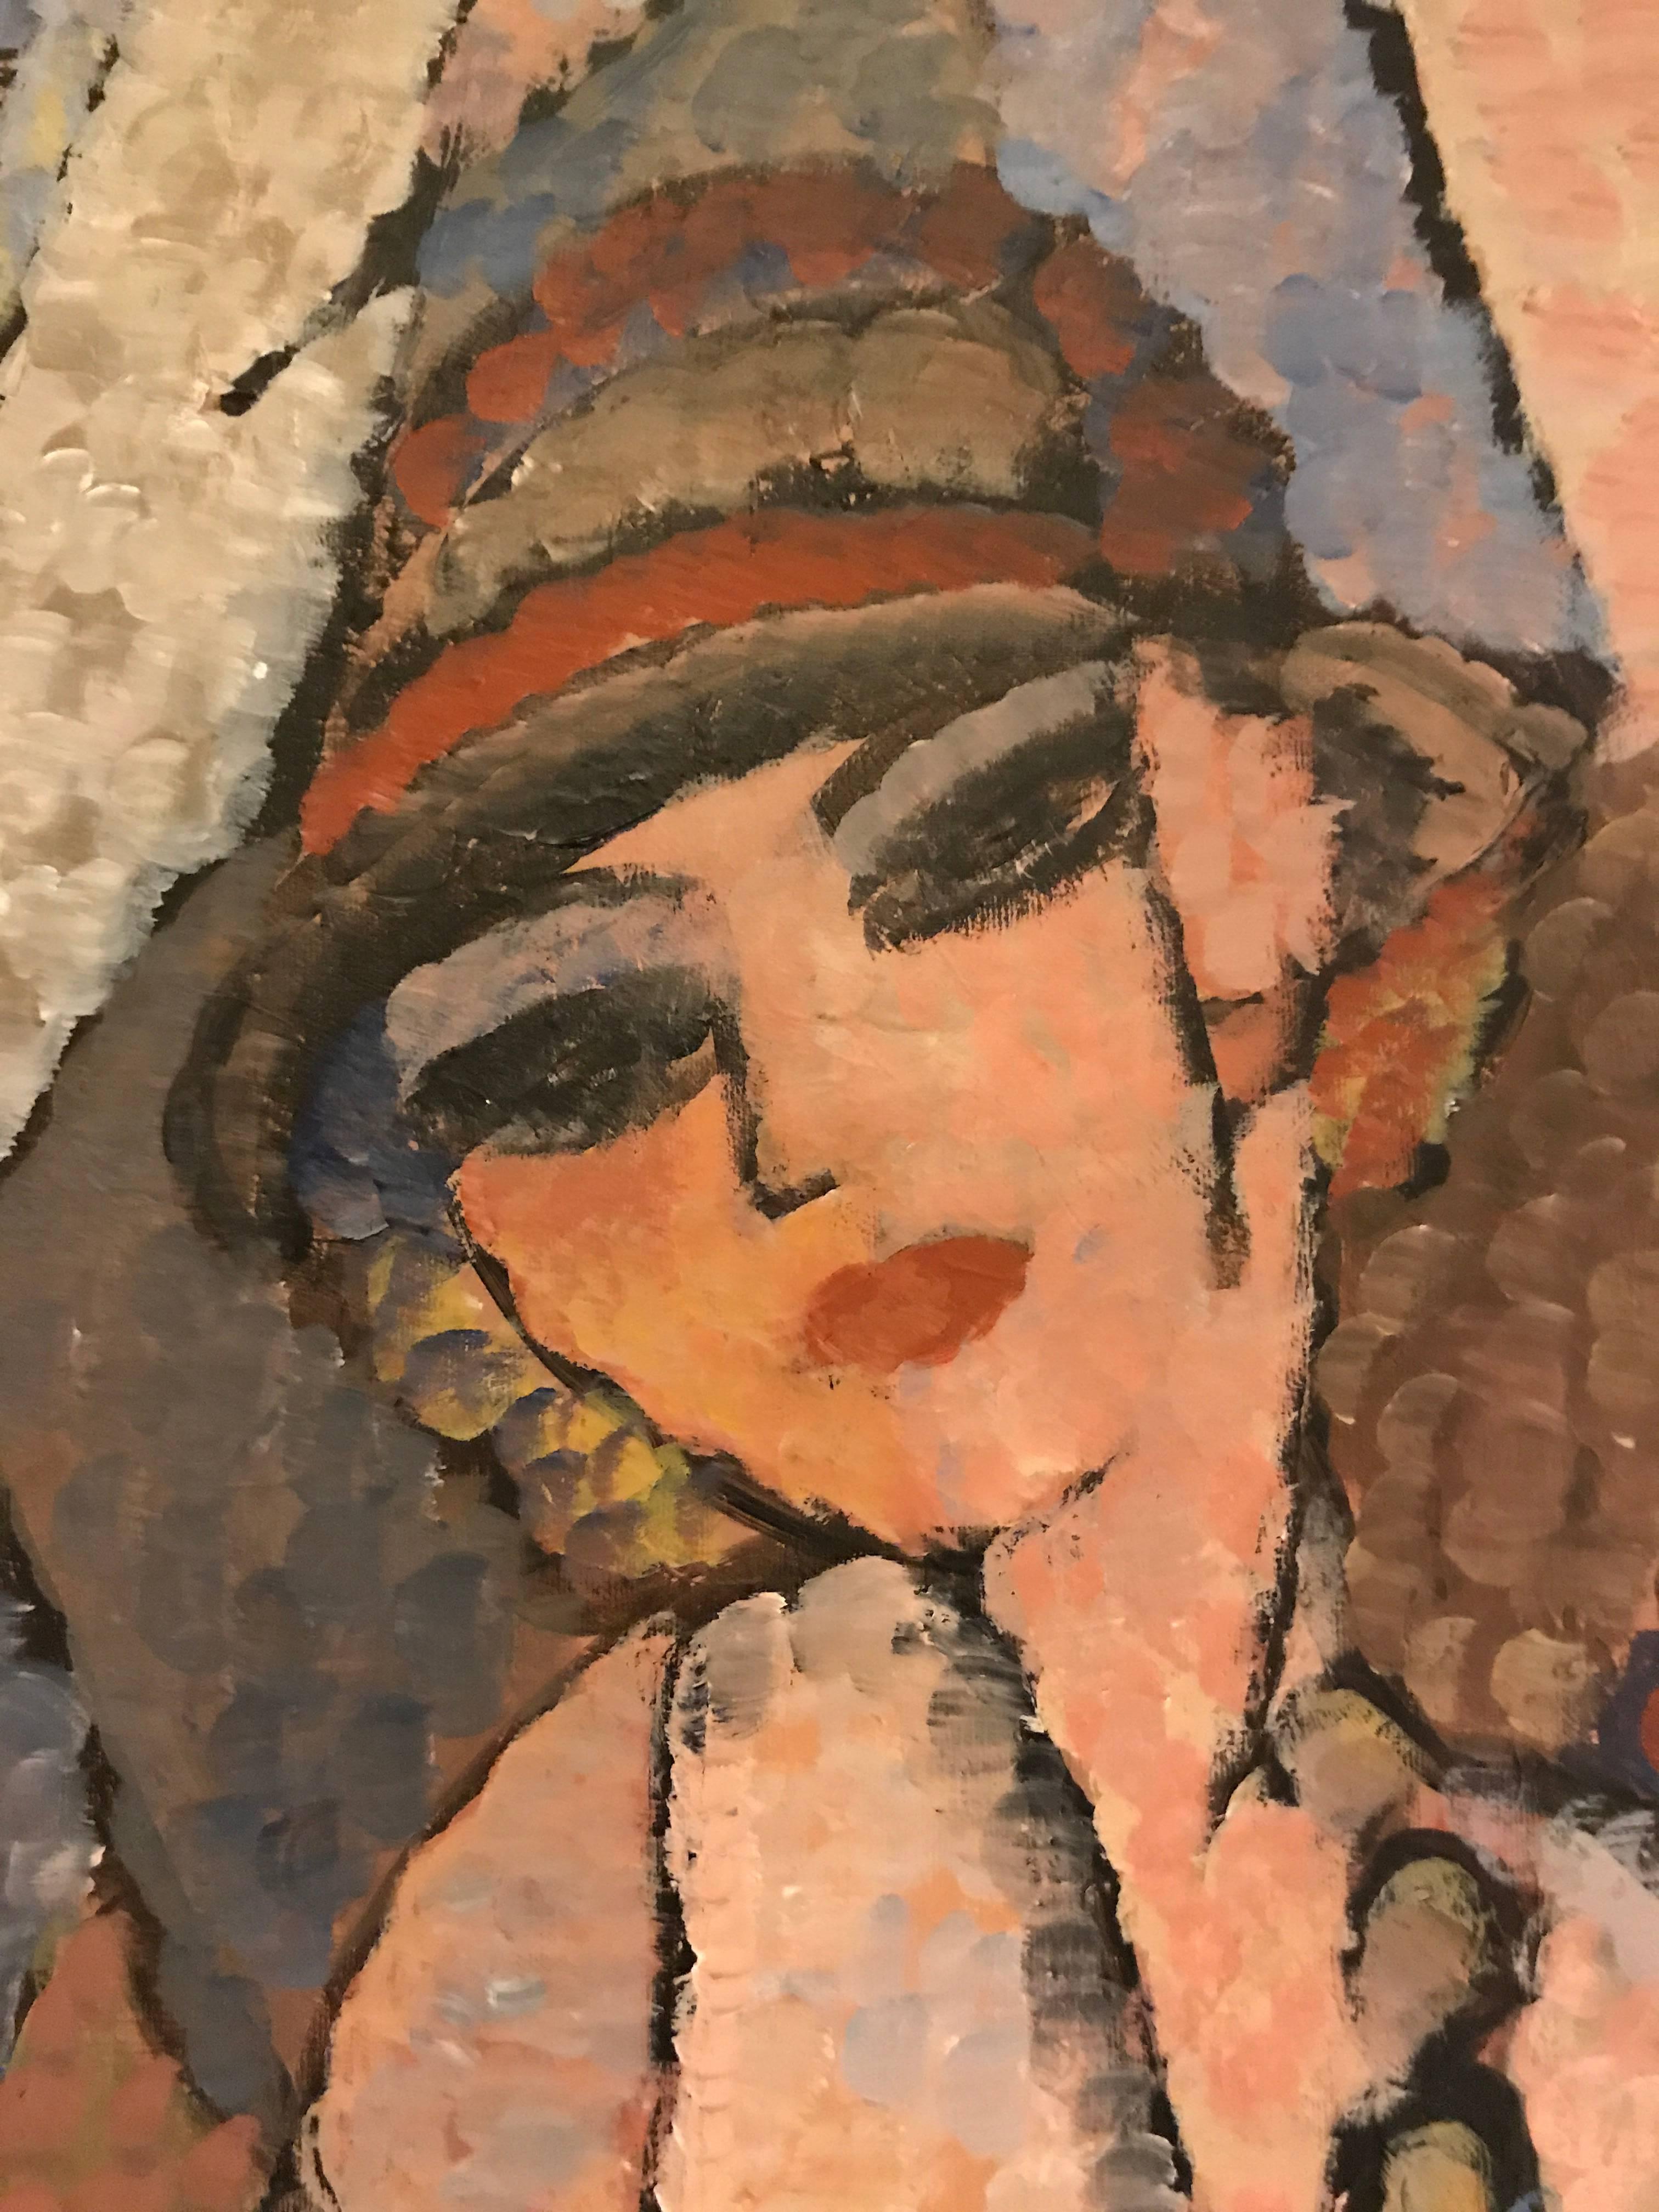 Painting By Fontaine Of an Art Deco Woman Smoking a Cigarette. Joseph Fontaine, American (1929 - 2004) This piece on consignment from a Greenwich CT Home. The owner stating that the piece was purchased in Sothebys in the late seventies or